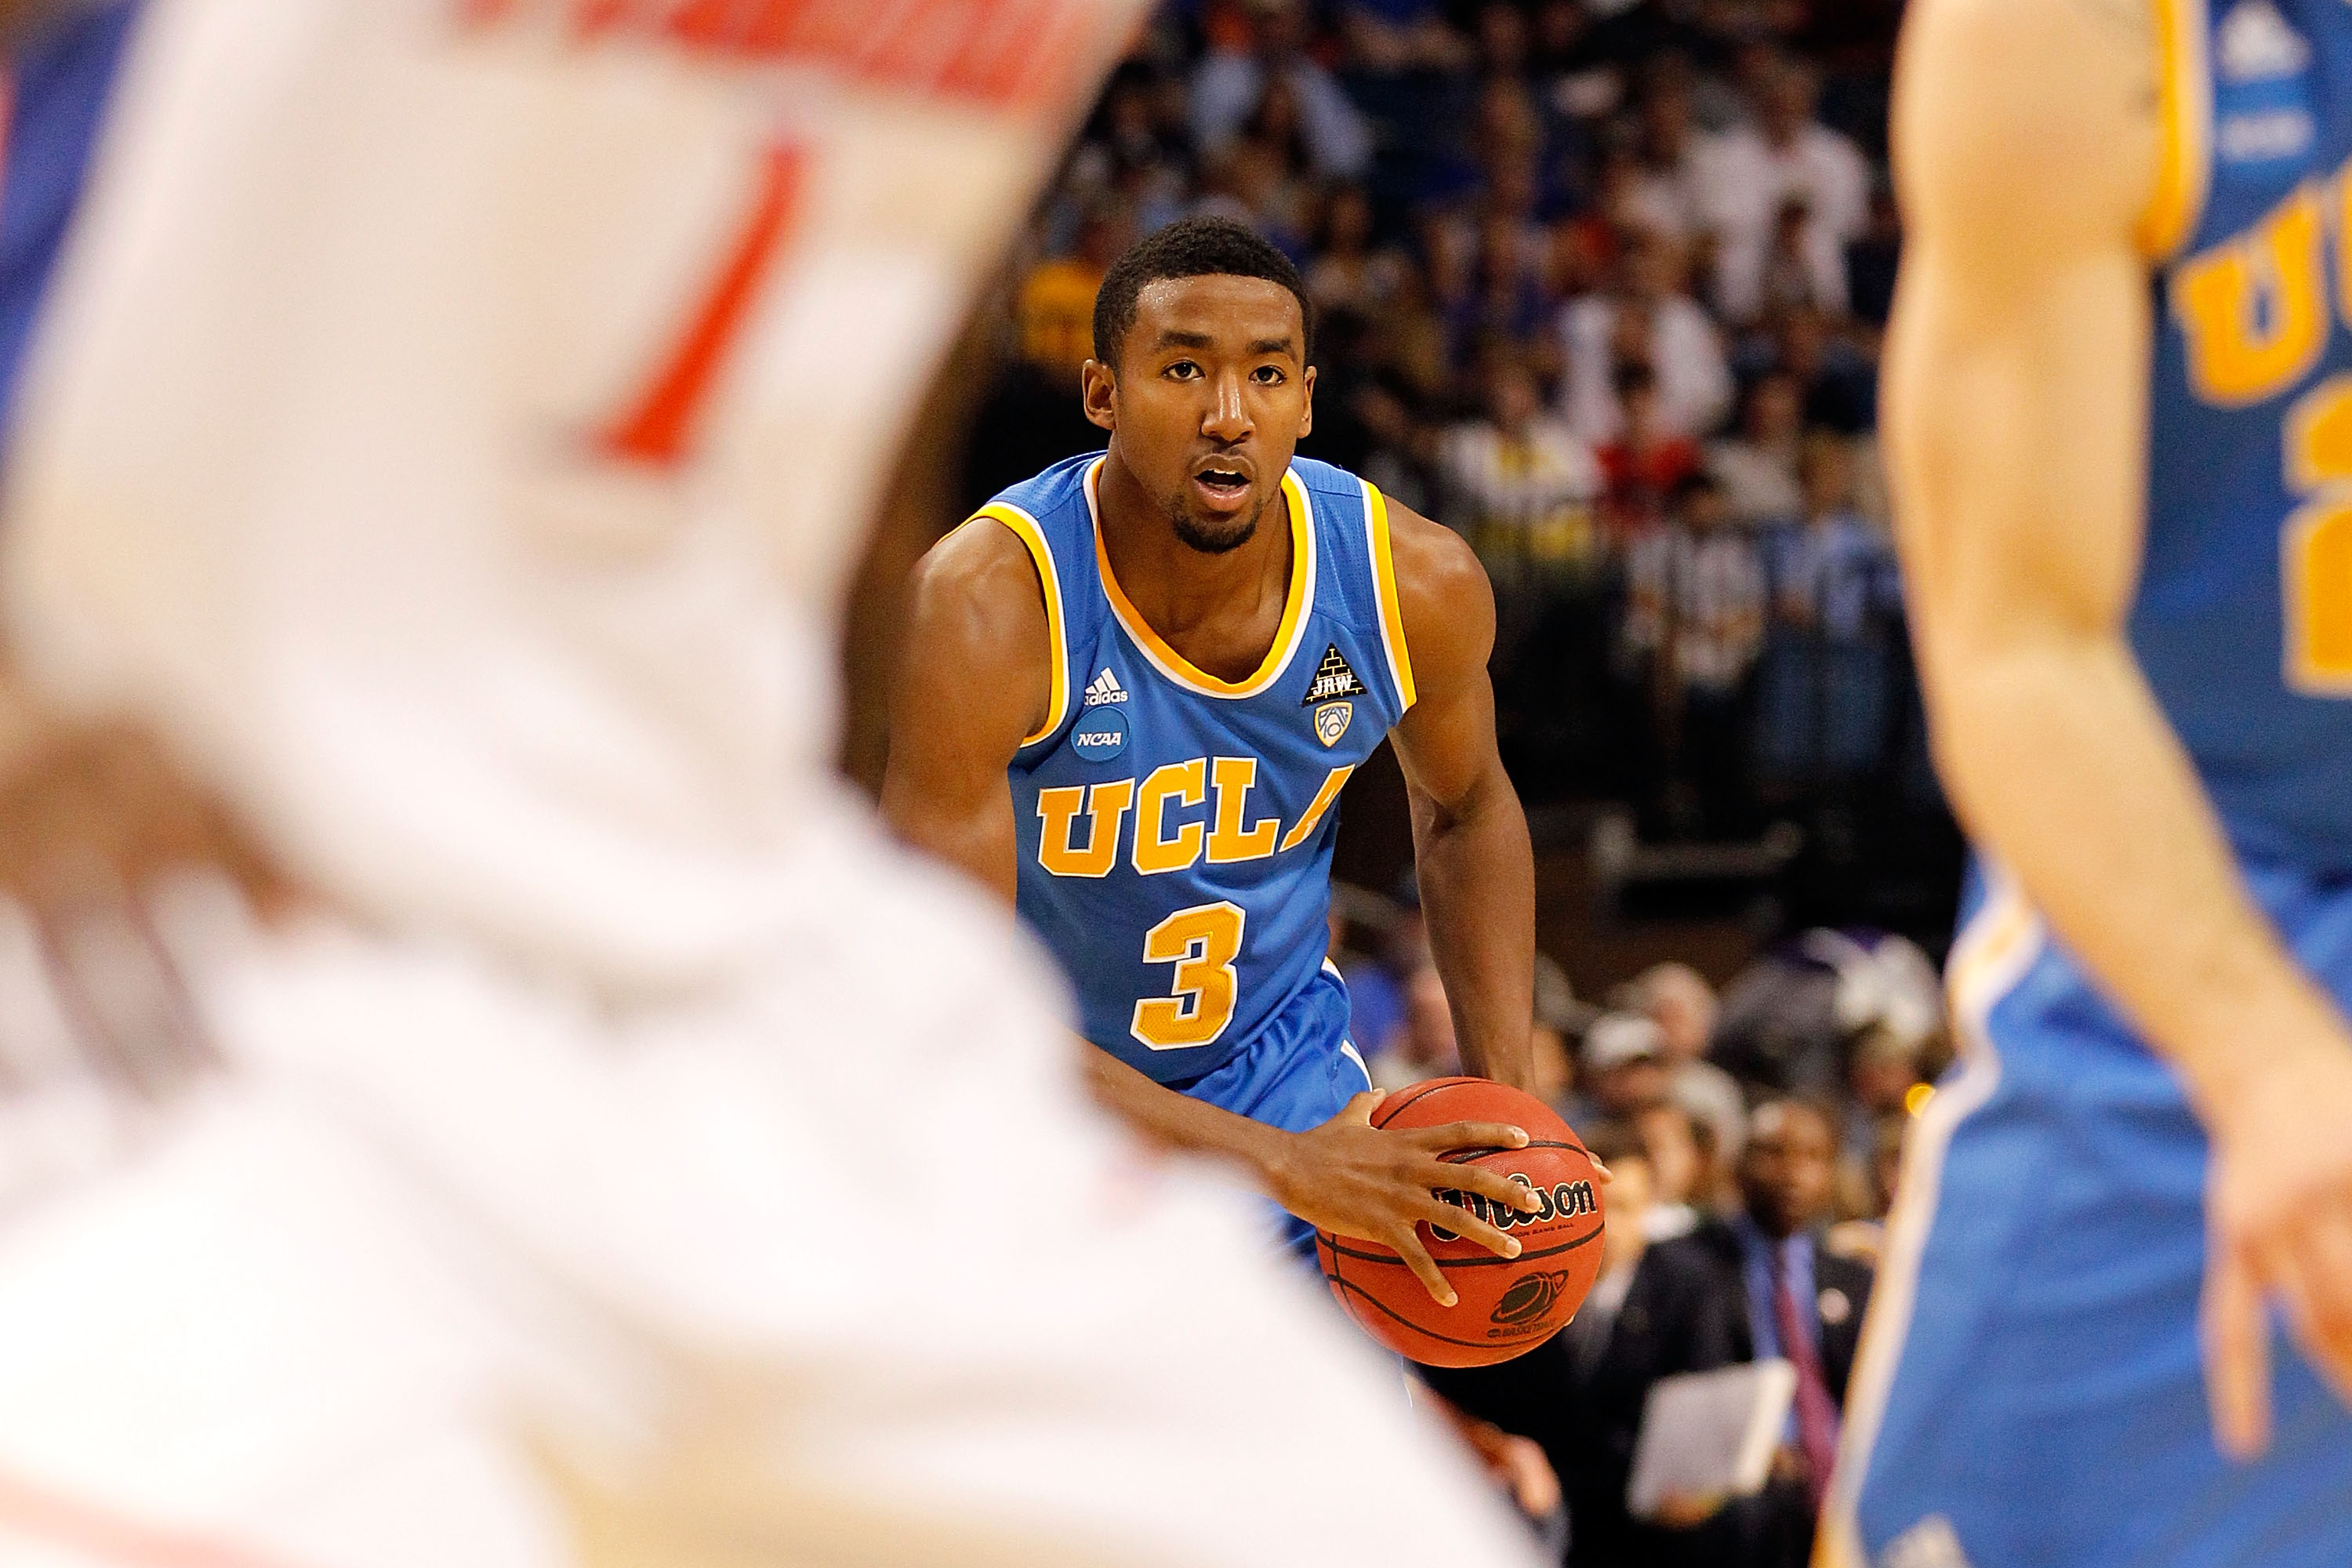 TAMPA, FL - MARCH 19:  Malcolm Lee #3 of the UCLA Bruins looks to pass the ball against the Florida Gators during the third round of the 2011 NCAA men's basketball tournament at St. Pete Times Forum on March 19, 2011 in Tampa, Florida. Florida won 73-65.